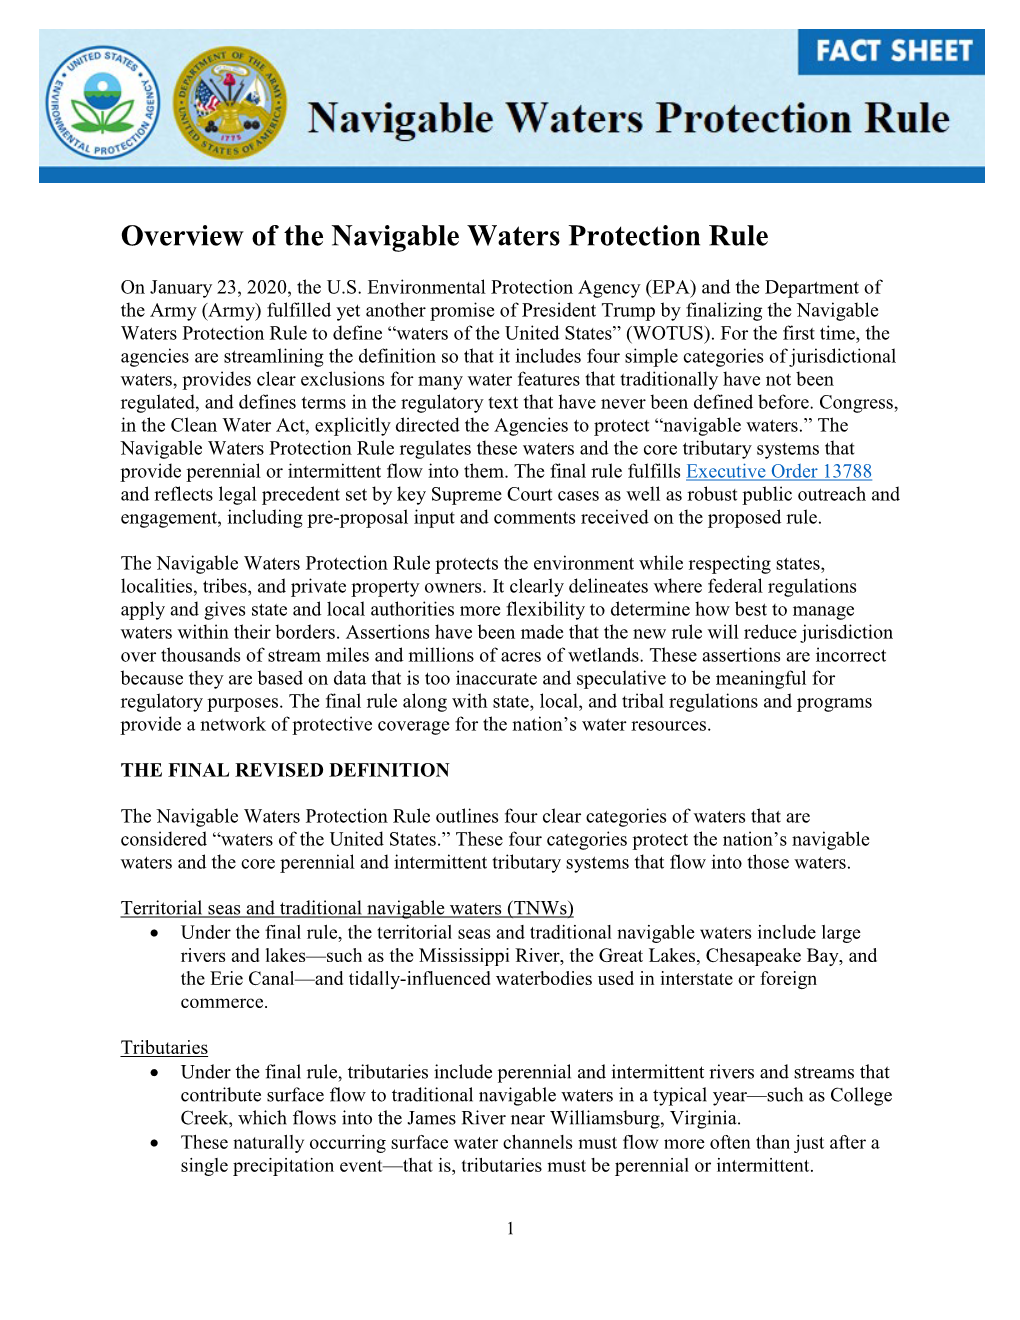 Overview of the Navigable Waters Protection Rule